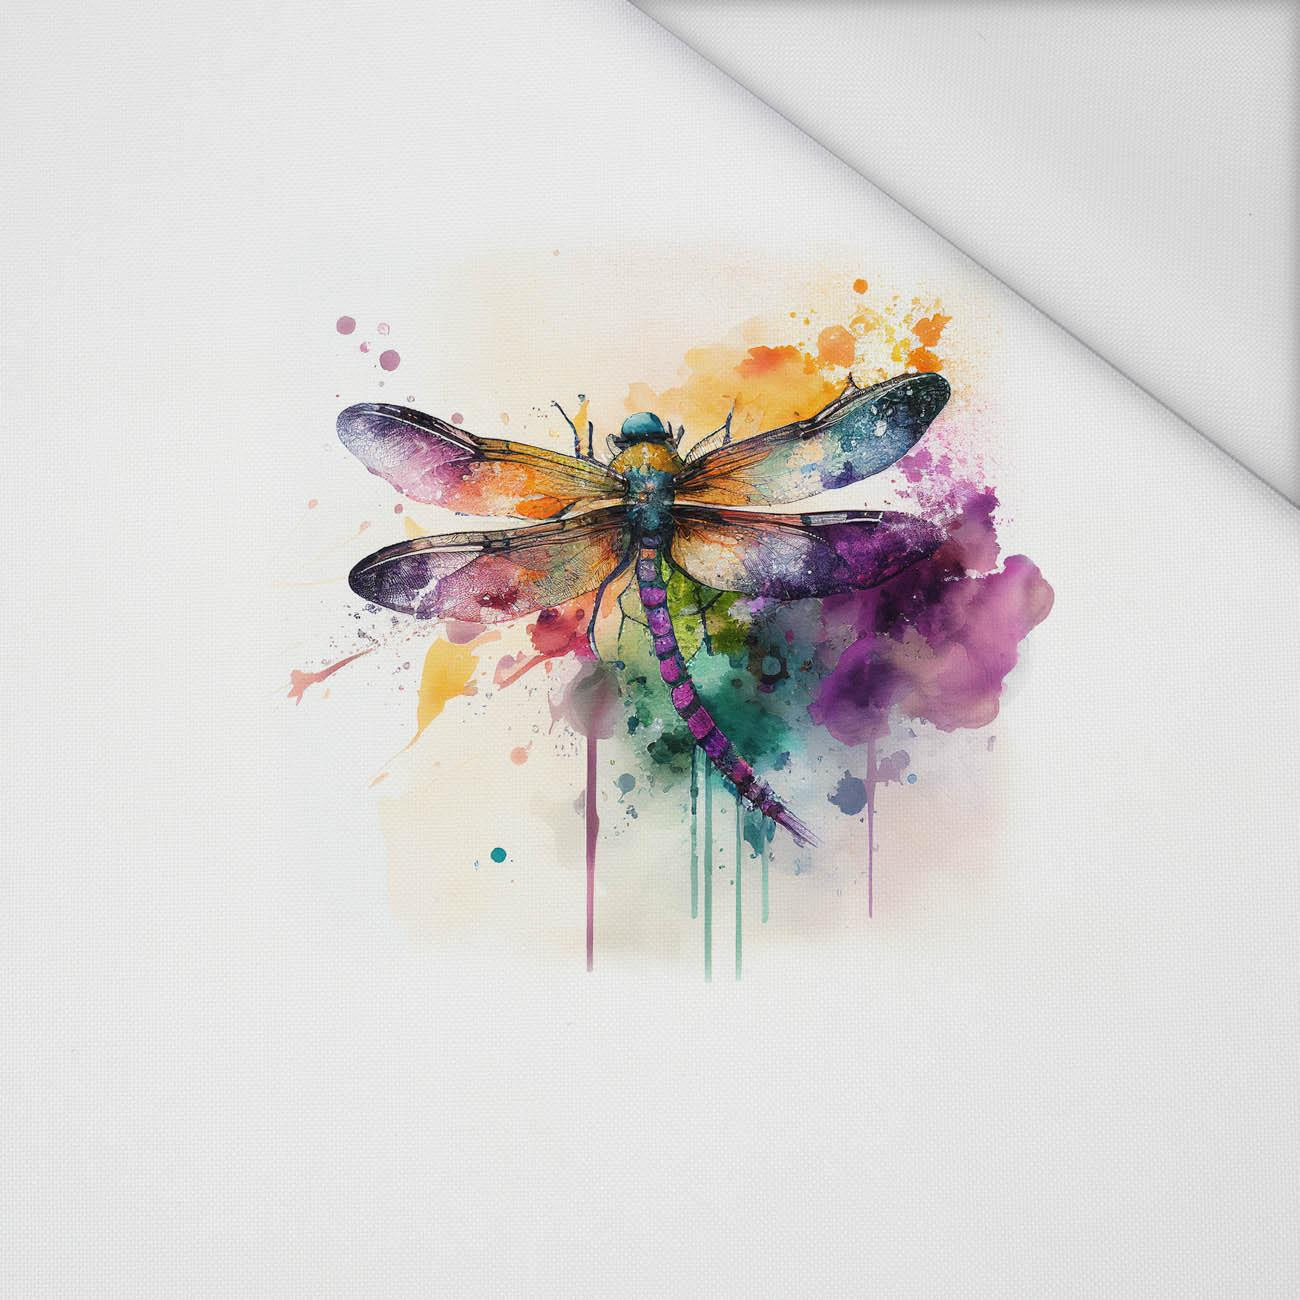 WATERCOLOR DRAGONFLY - panel (60cm x 50cm) Waterproof woven fabric